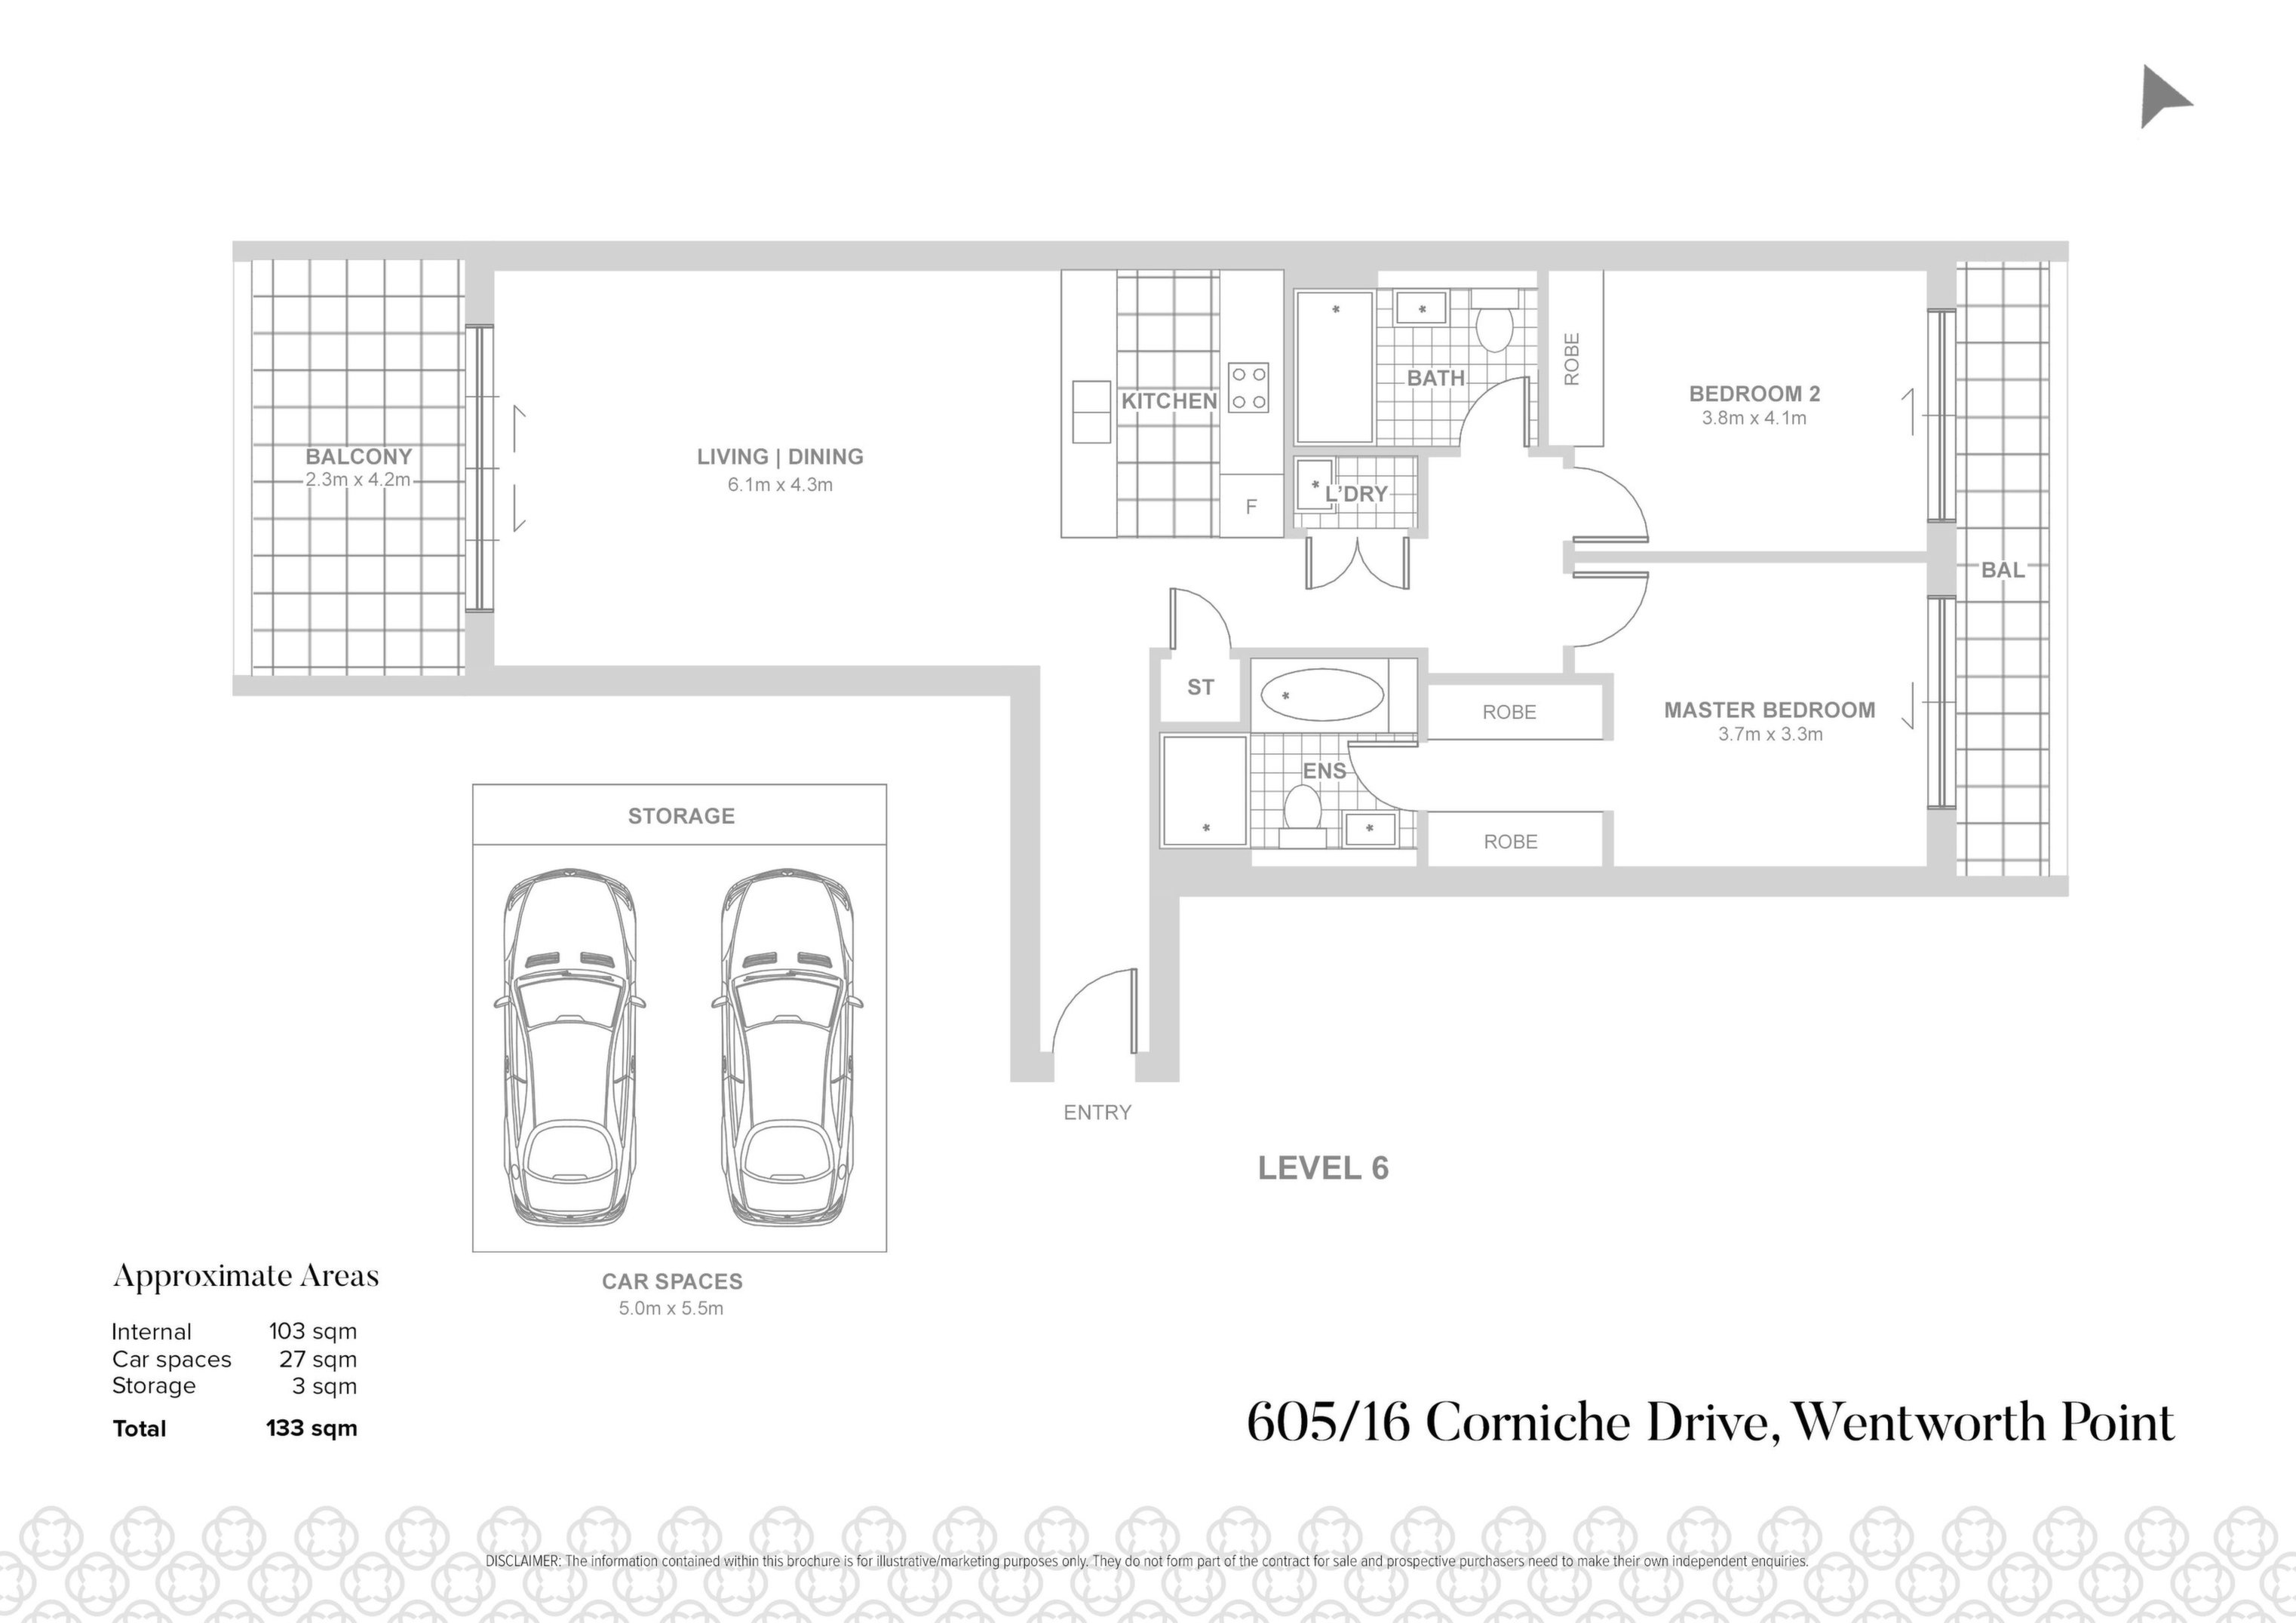 605/16 Corniche Drive, Wentworth Point Sold by Chidiac Realty - floorplan